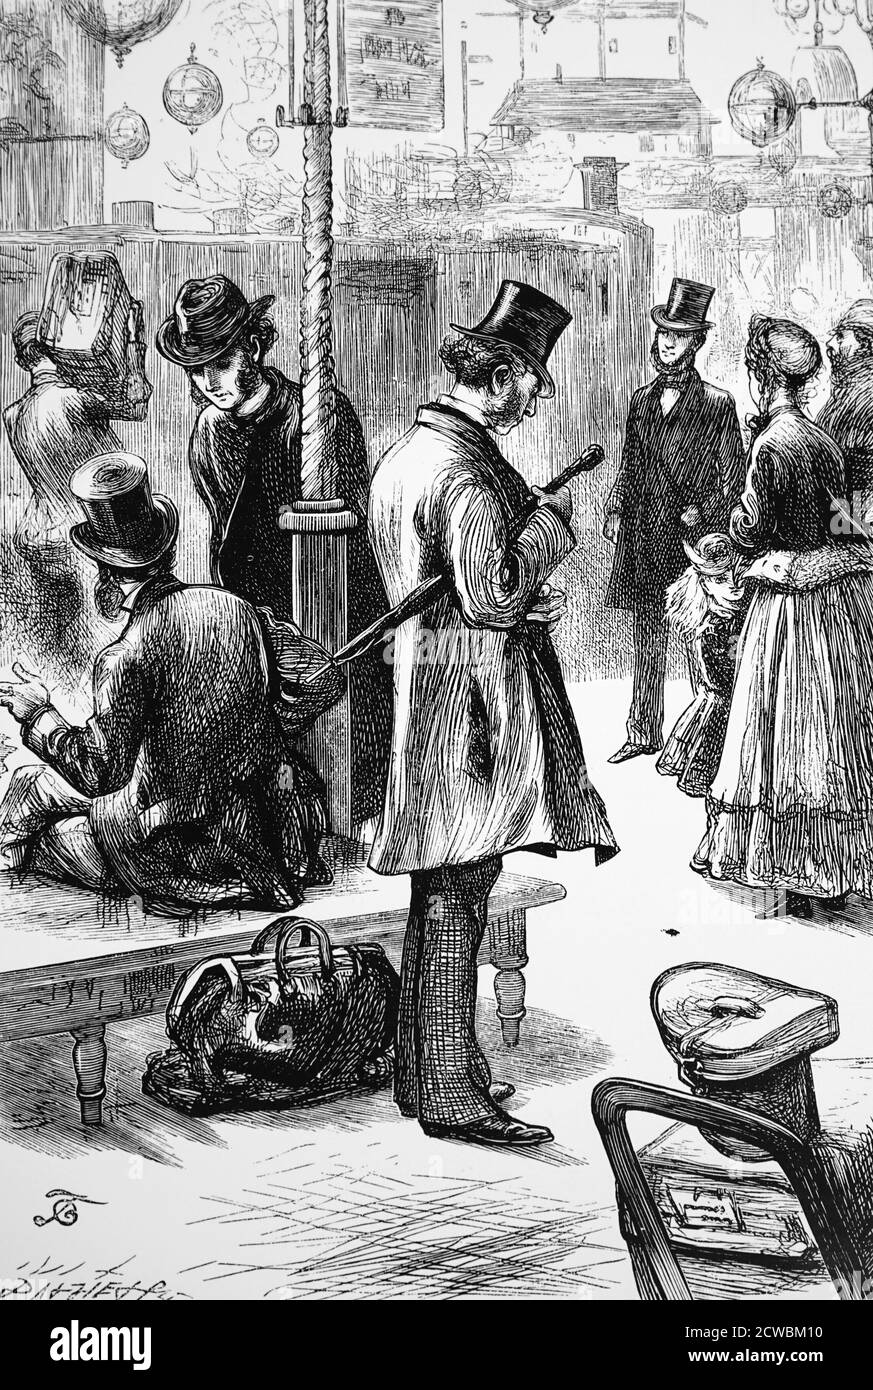 Engraving depicting a scene in a railway station. In the bottom right corner is a gentleman's leather hat box. Illustration by Gordon Thomson Stock Photo